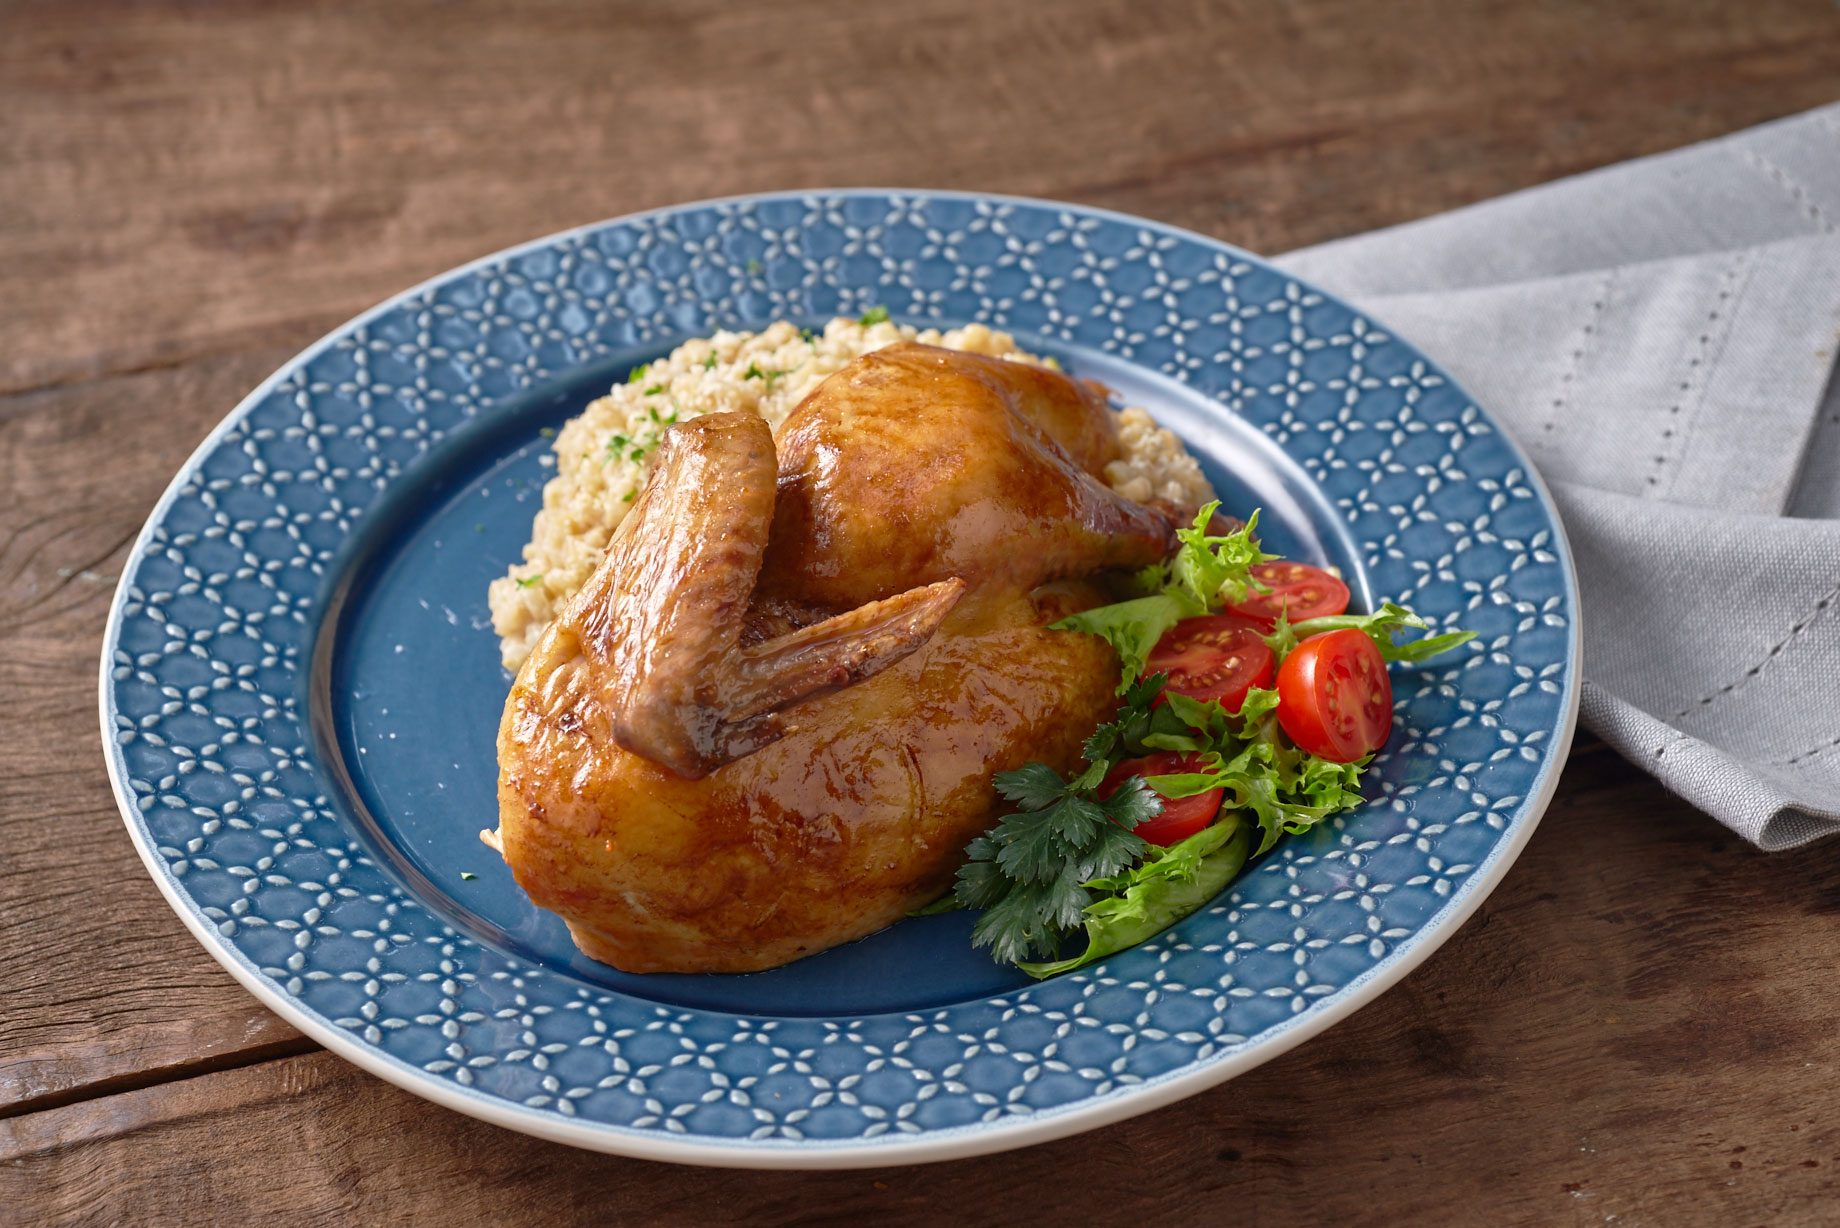 ROAST CHICKEN WITH BARLEY PORRIDGE. Photo from Knorr 